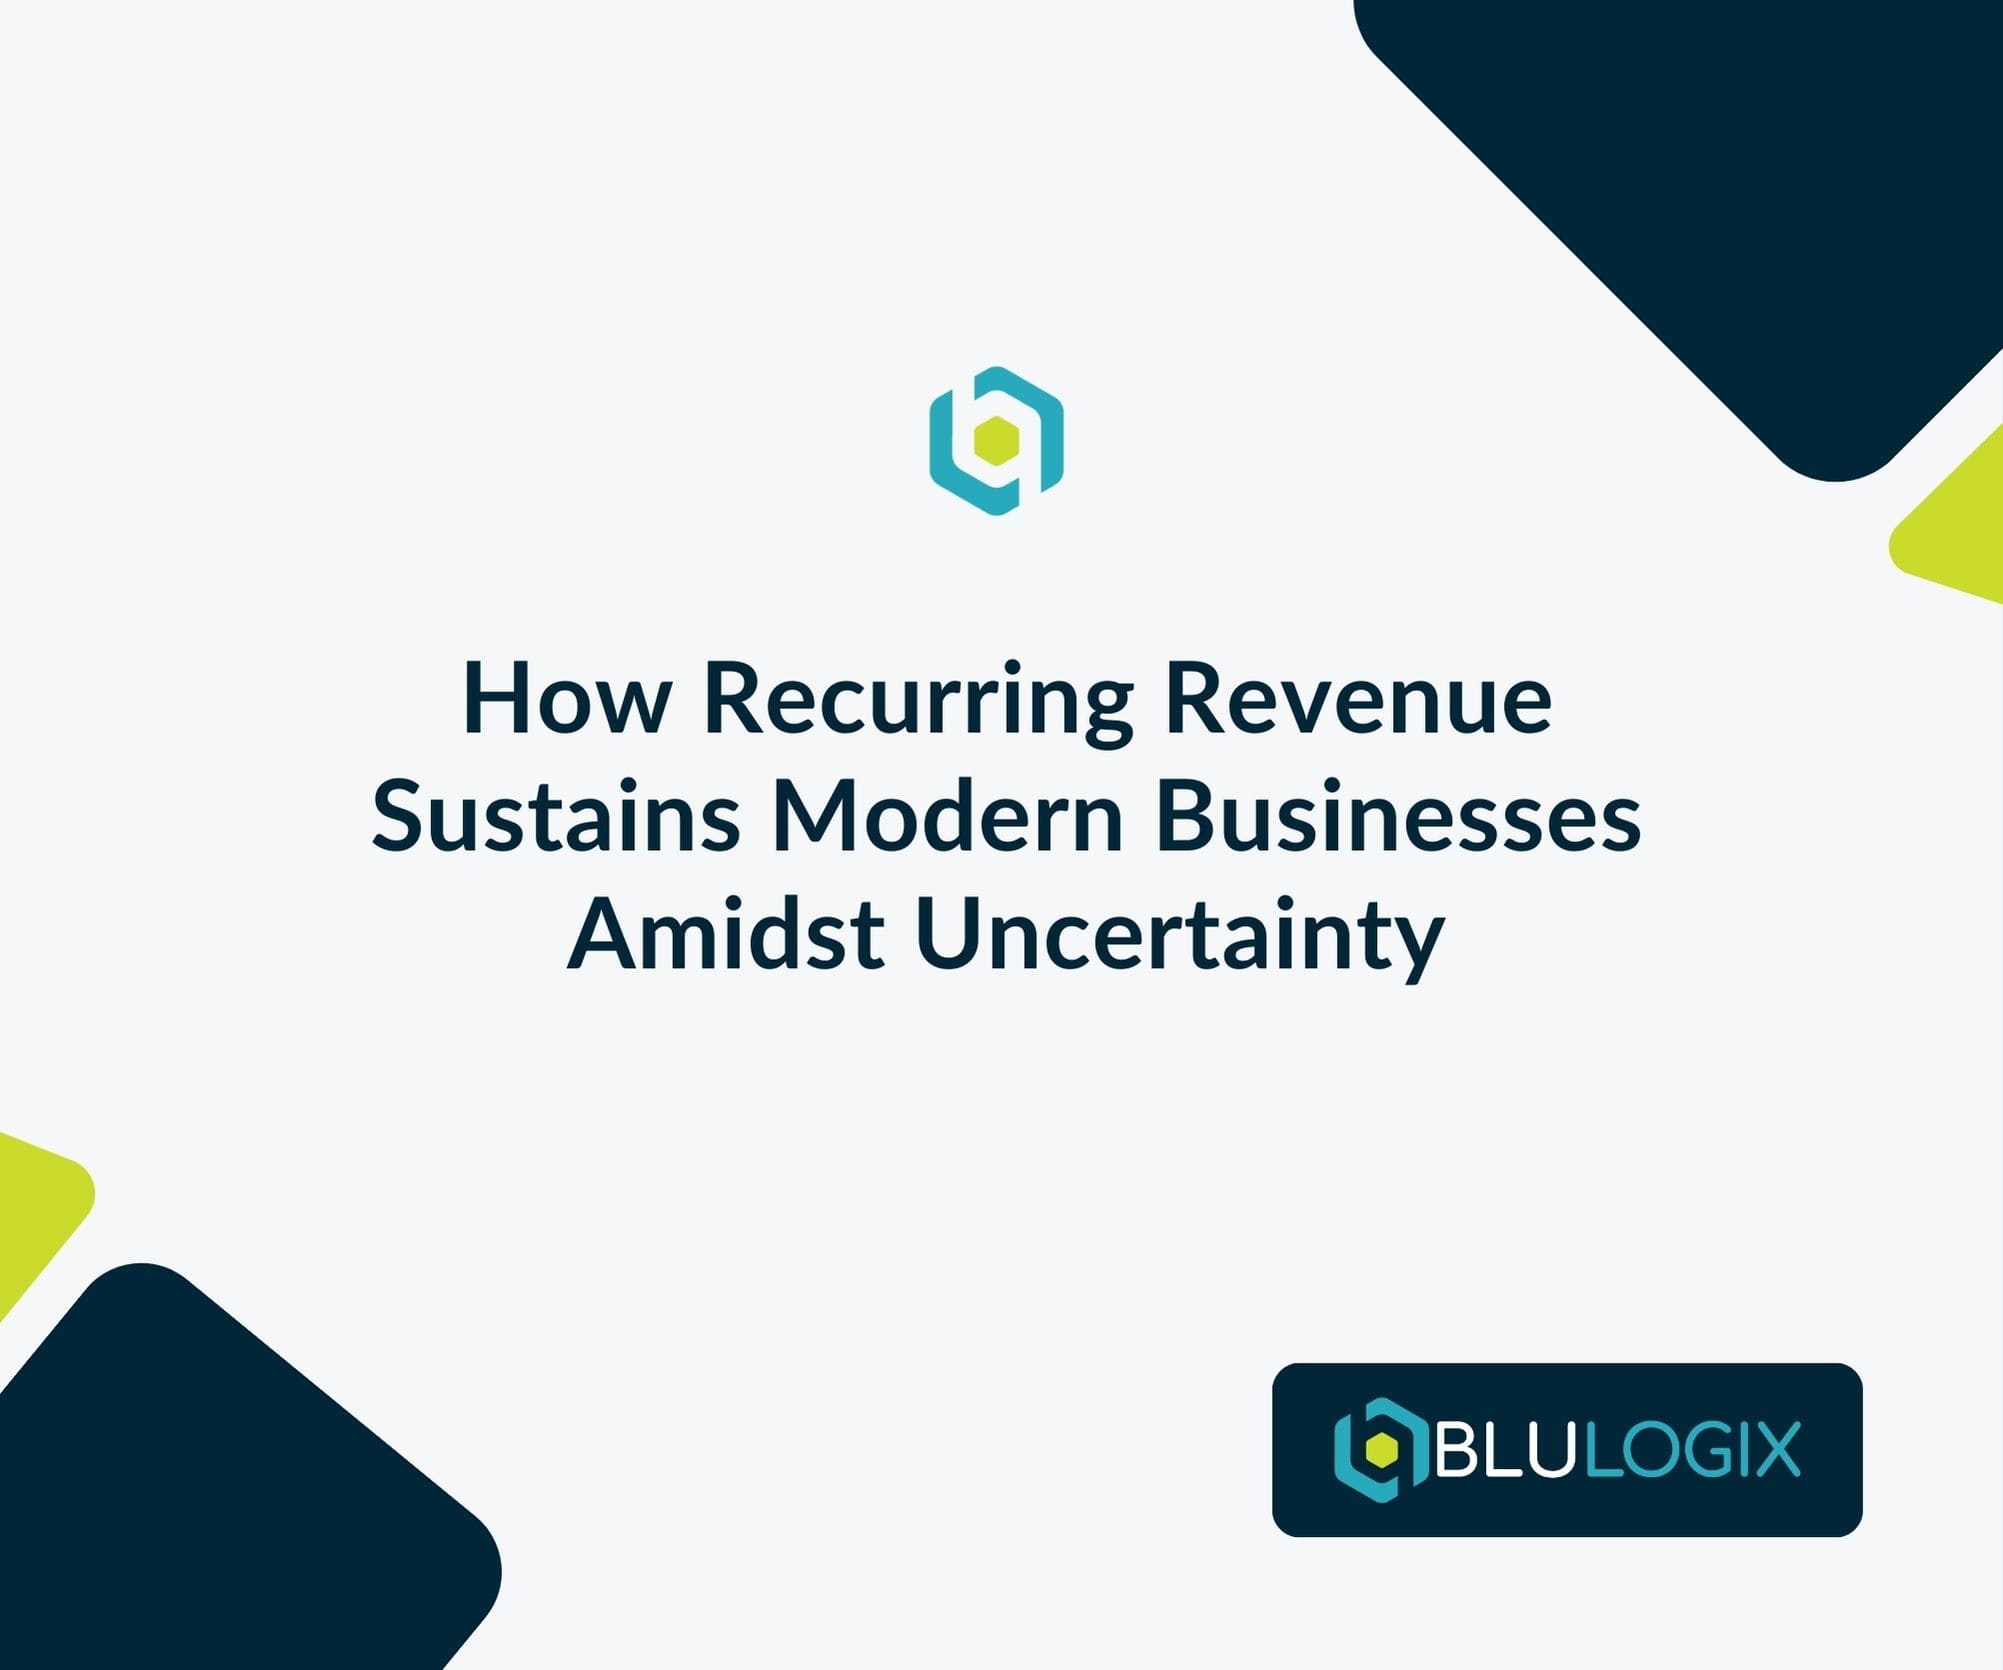 How Recurring Revenue Sustains Modern Businesses Amidst Uncertainty